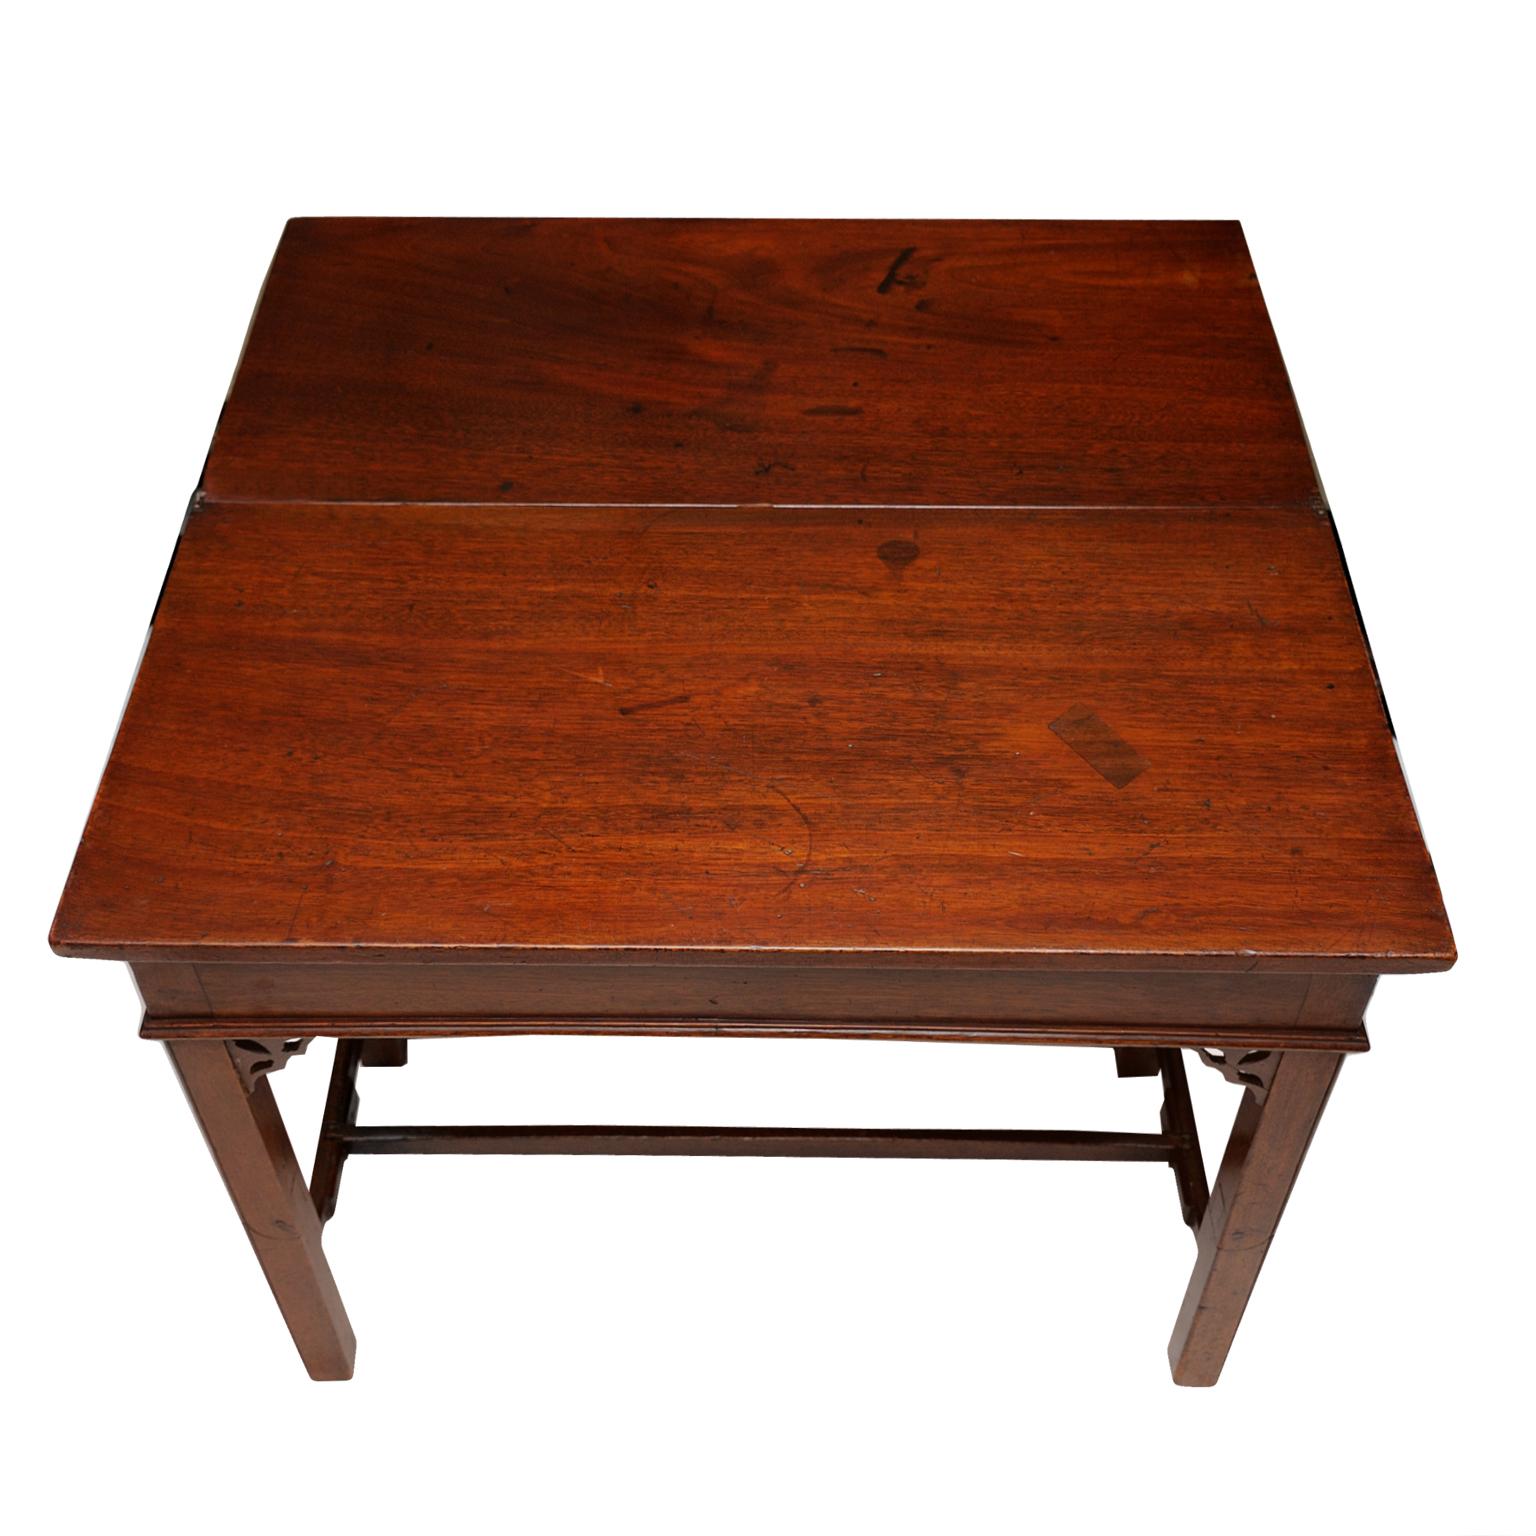 English Mahogany Chippendale Period Military Campaign Table, circa 1760 For Sale